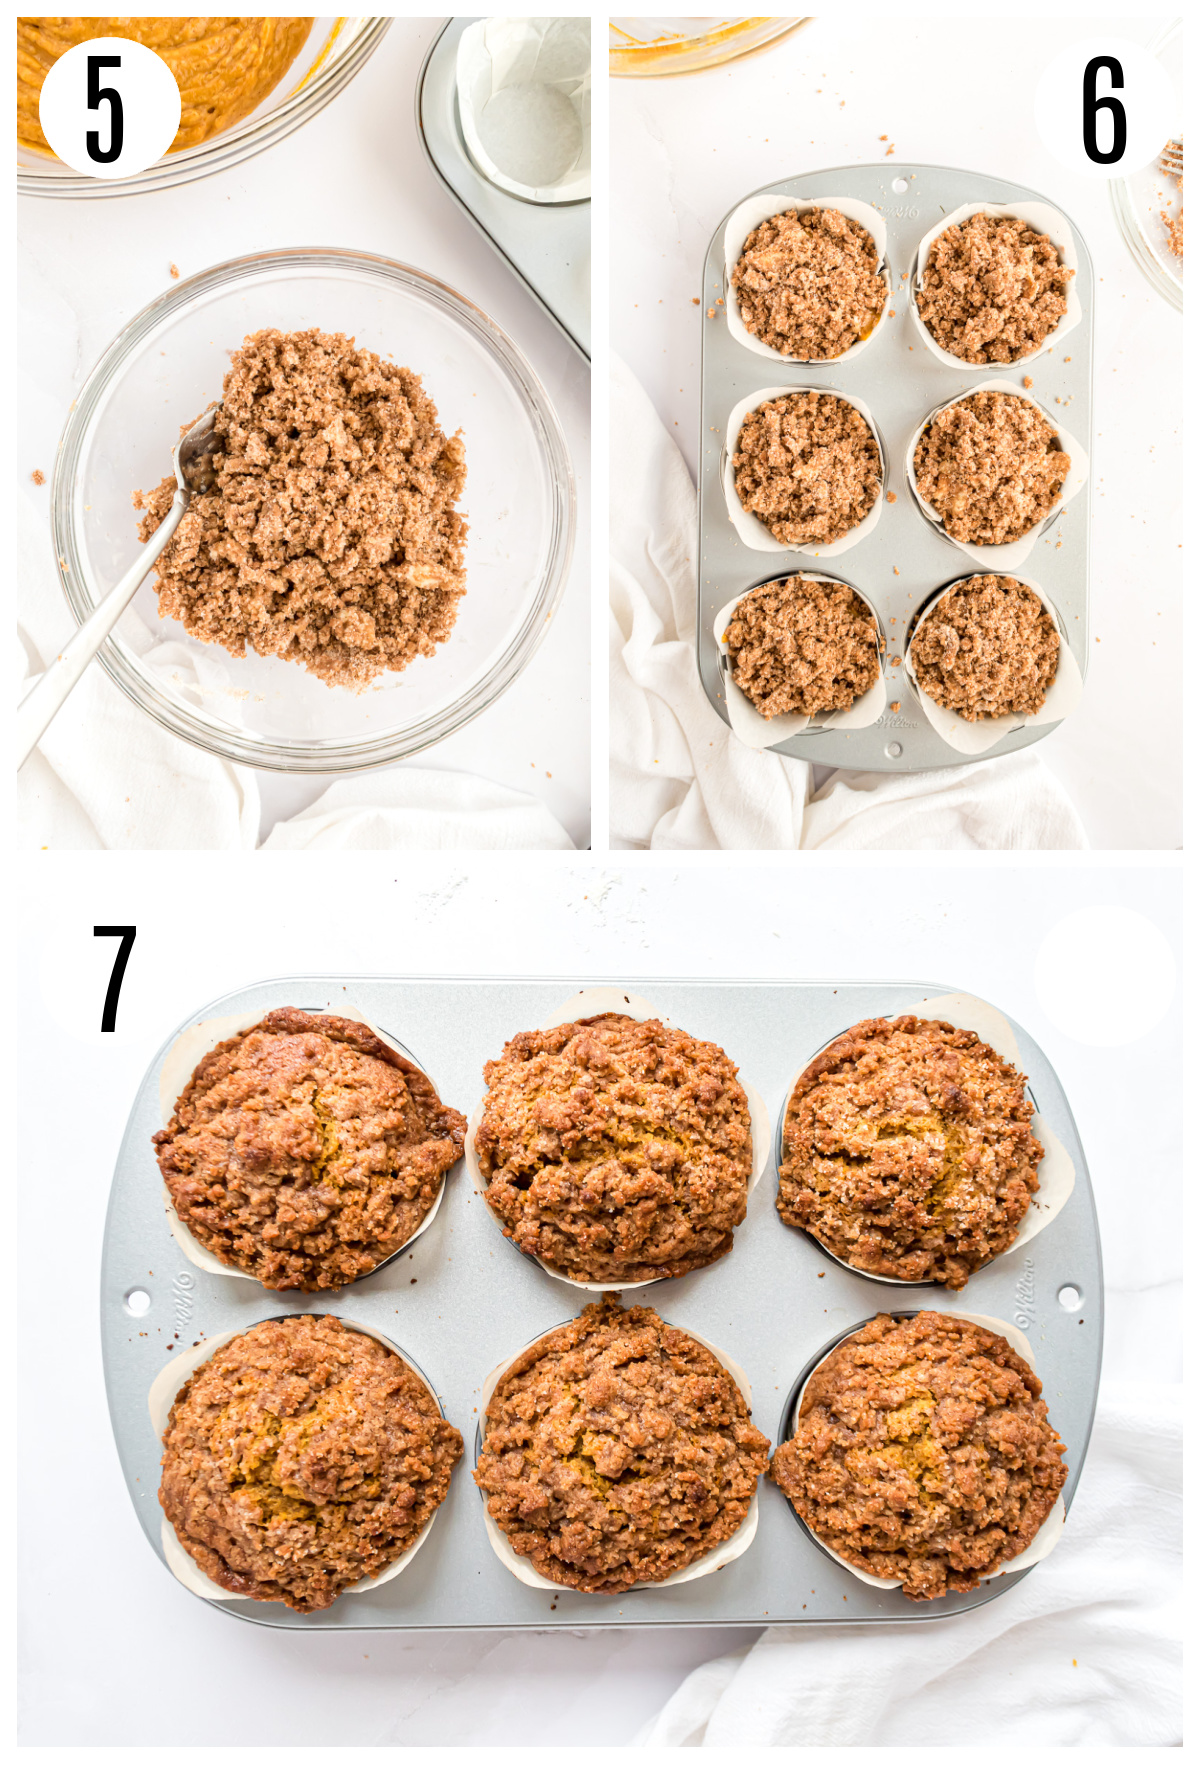 A group of 3 photos that show the next steps in making the Panera Bread Pumpkin Muffin Recipe that include combining the streusel ingredients, filling the muffin tin and baking the muffins.